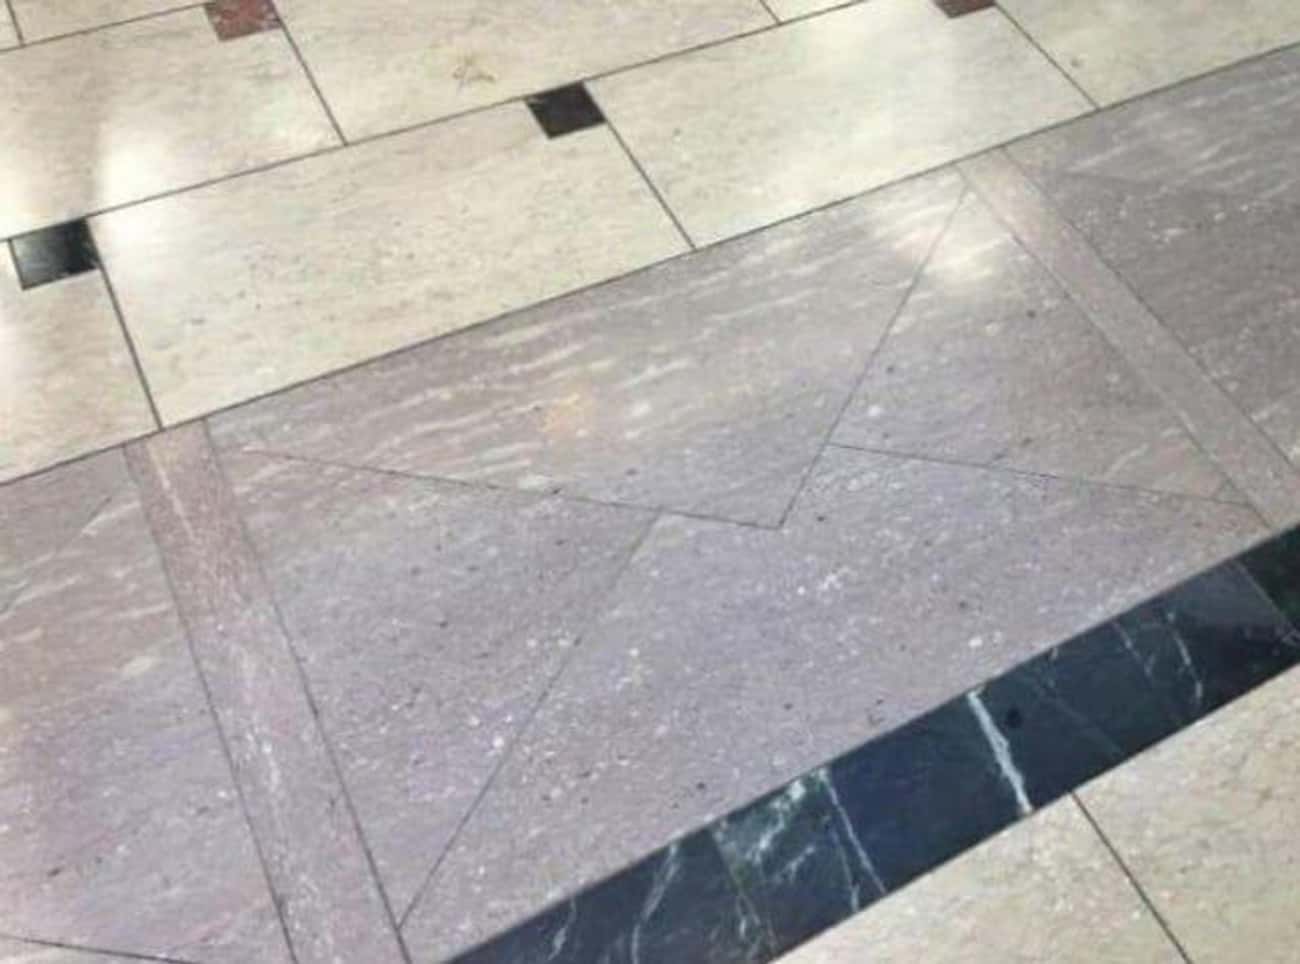 Envelope Floor Tiles At A Post Office